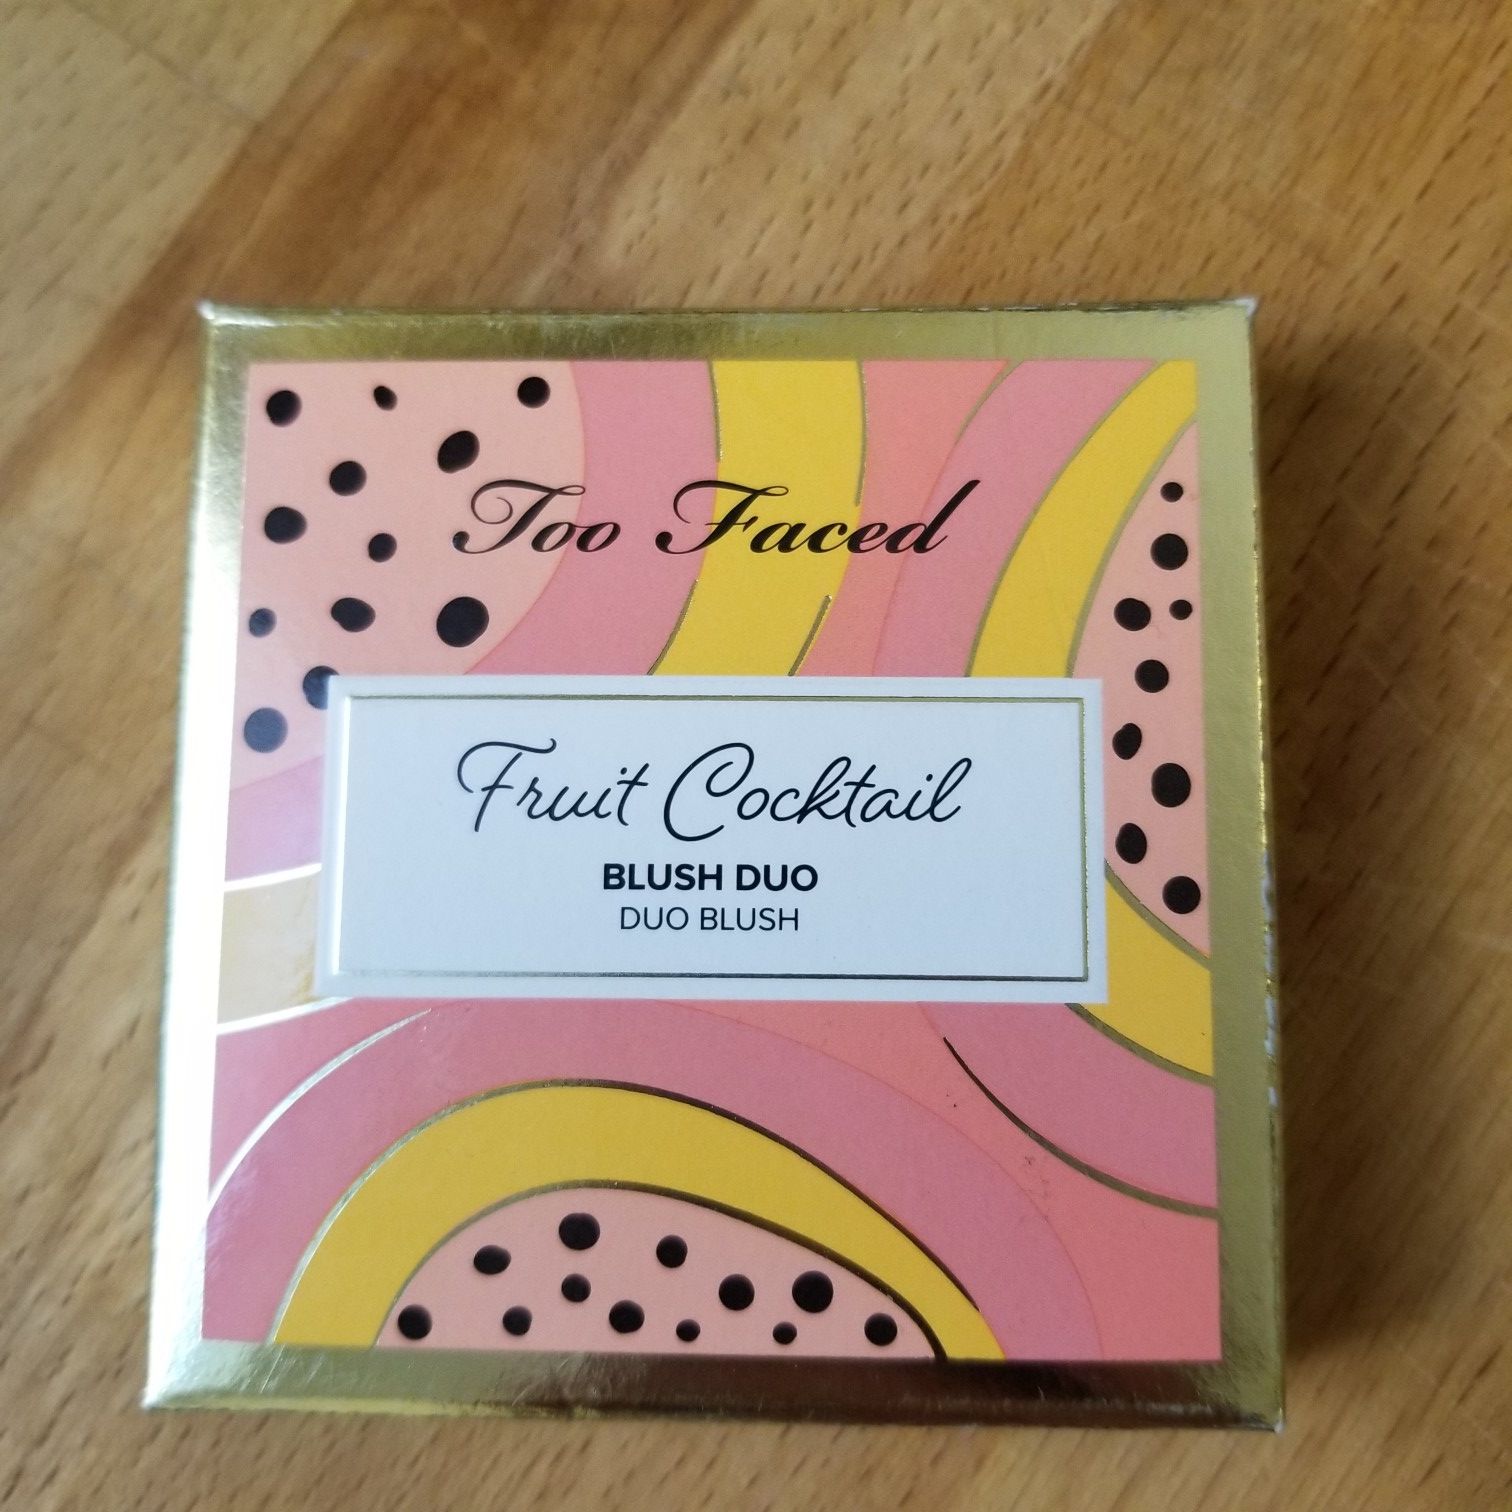 Too Faced fruit cocktail blush duo